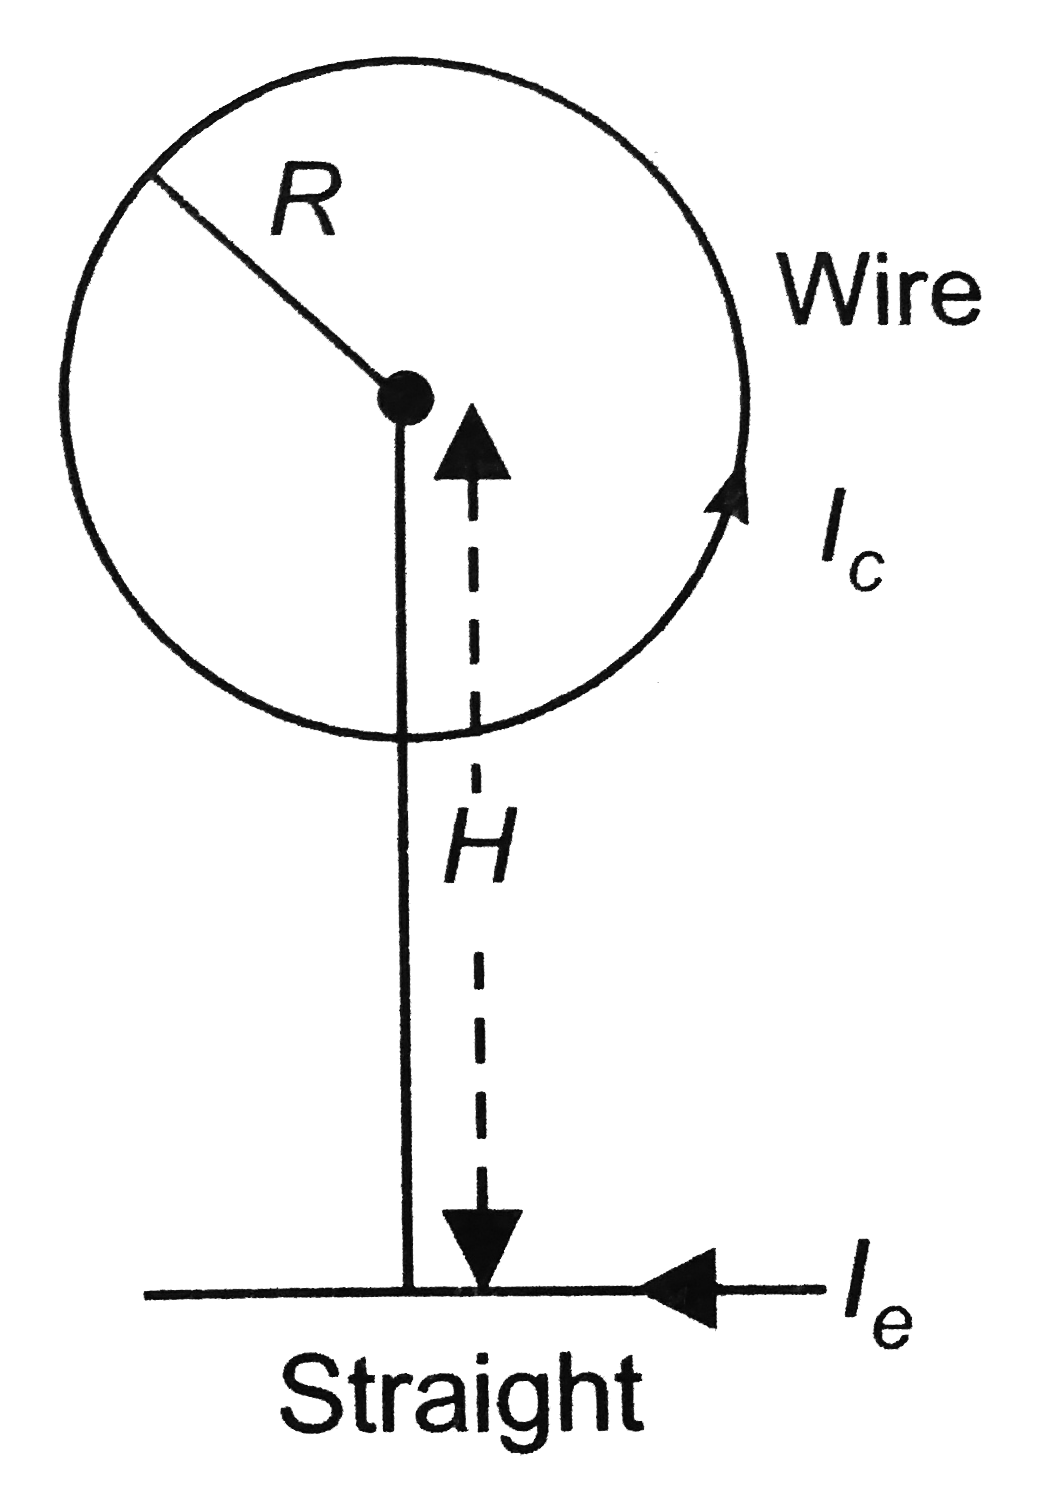 Circular loop of a wire and a long straight wire carry current I(c ) and I(e )respectively as shown in figure. Assuming that these are placed in the same plane. The magnetic field will be zero at the centre of the loop when the separation H is: